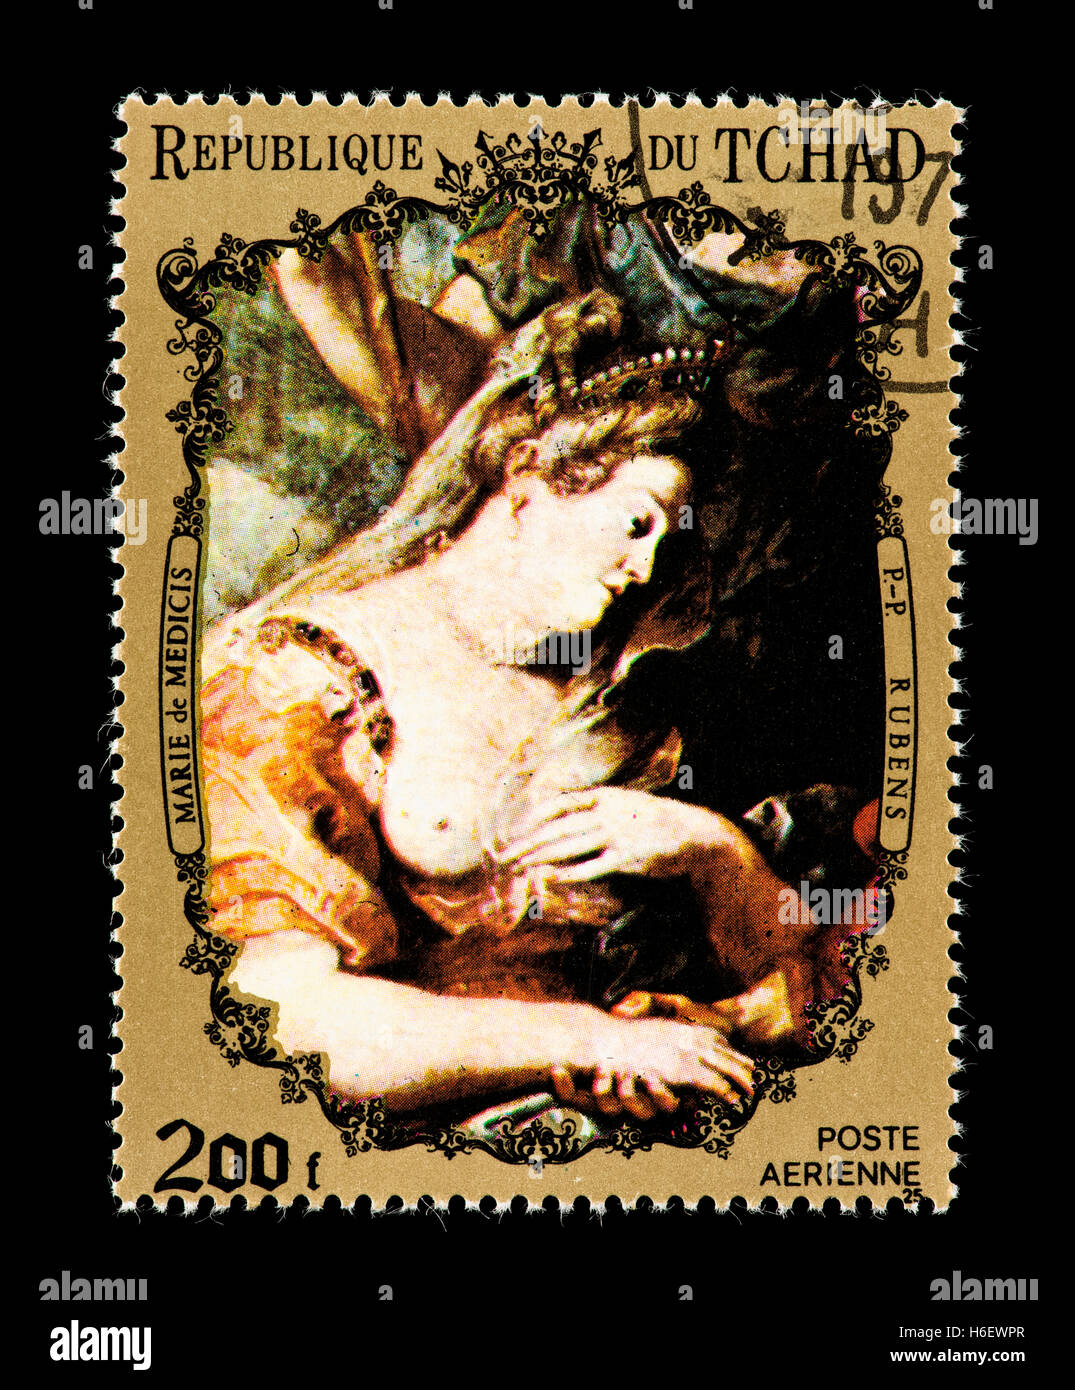 Postage stamp from Chad depicting the Peter Paul Rubens painting of Marie de Medici Stock Photo